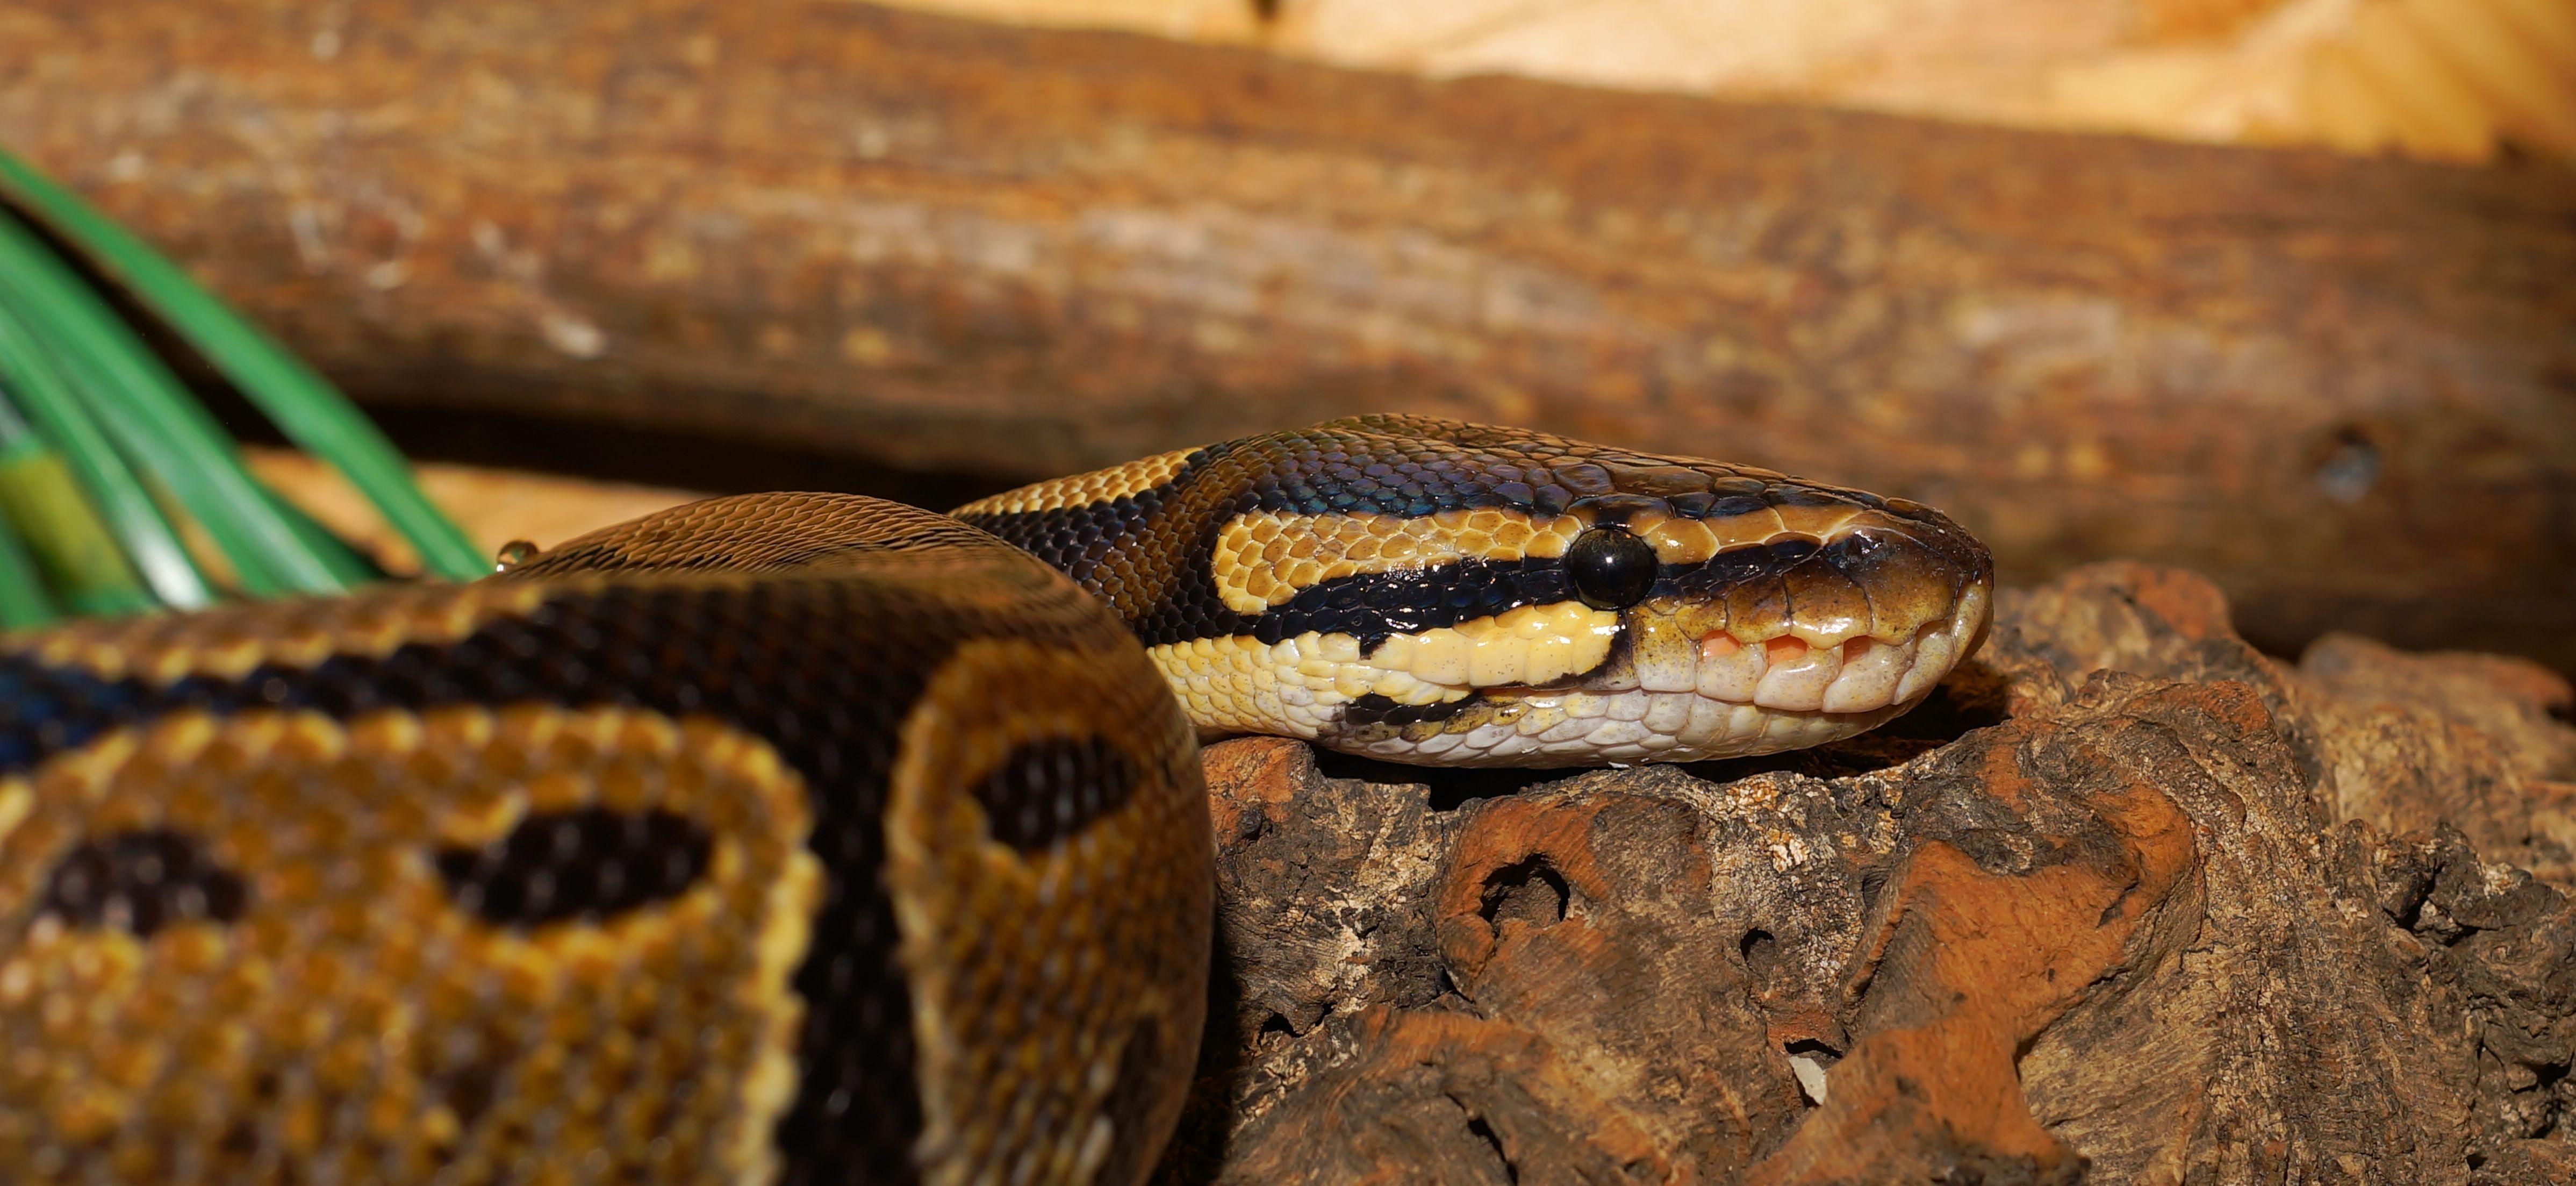 The ball python, also known as the Royal Python 4k Ultra HD